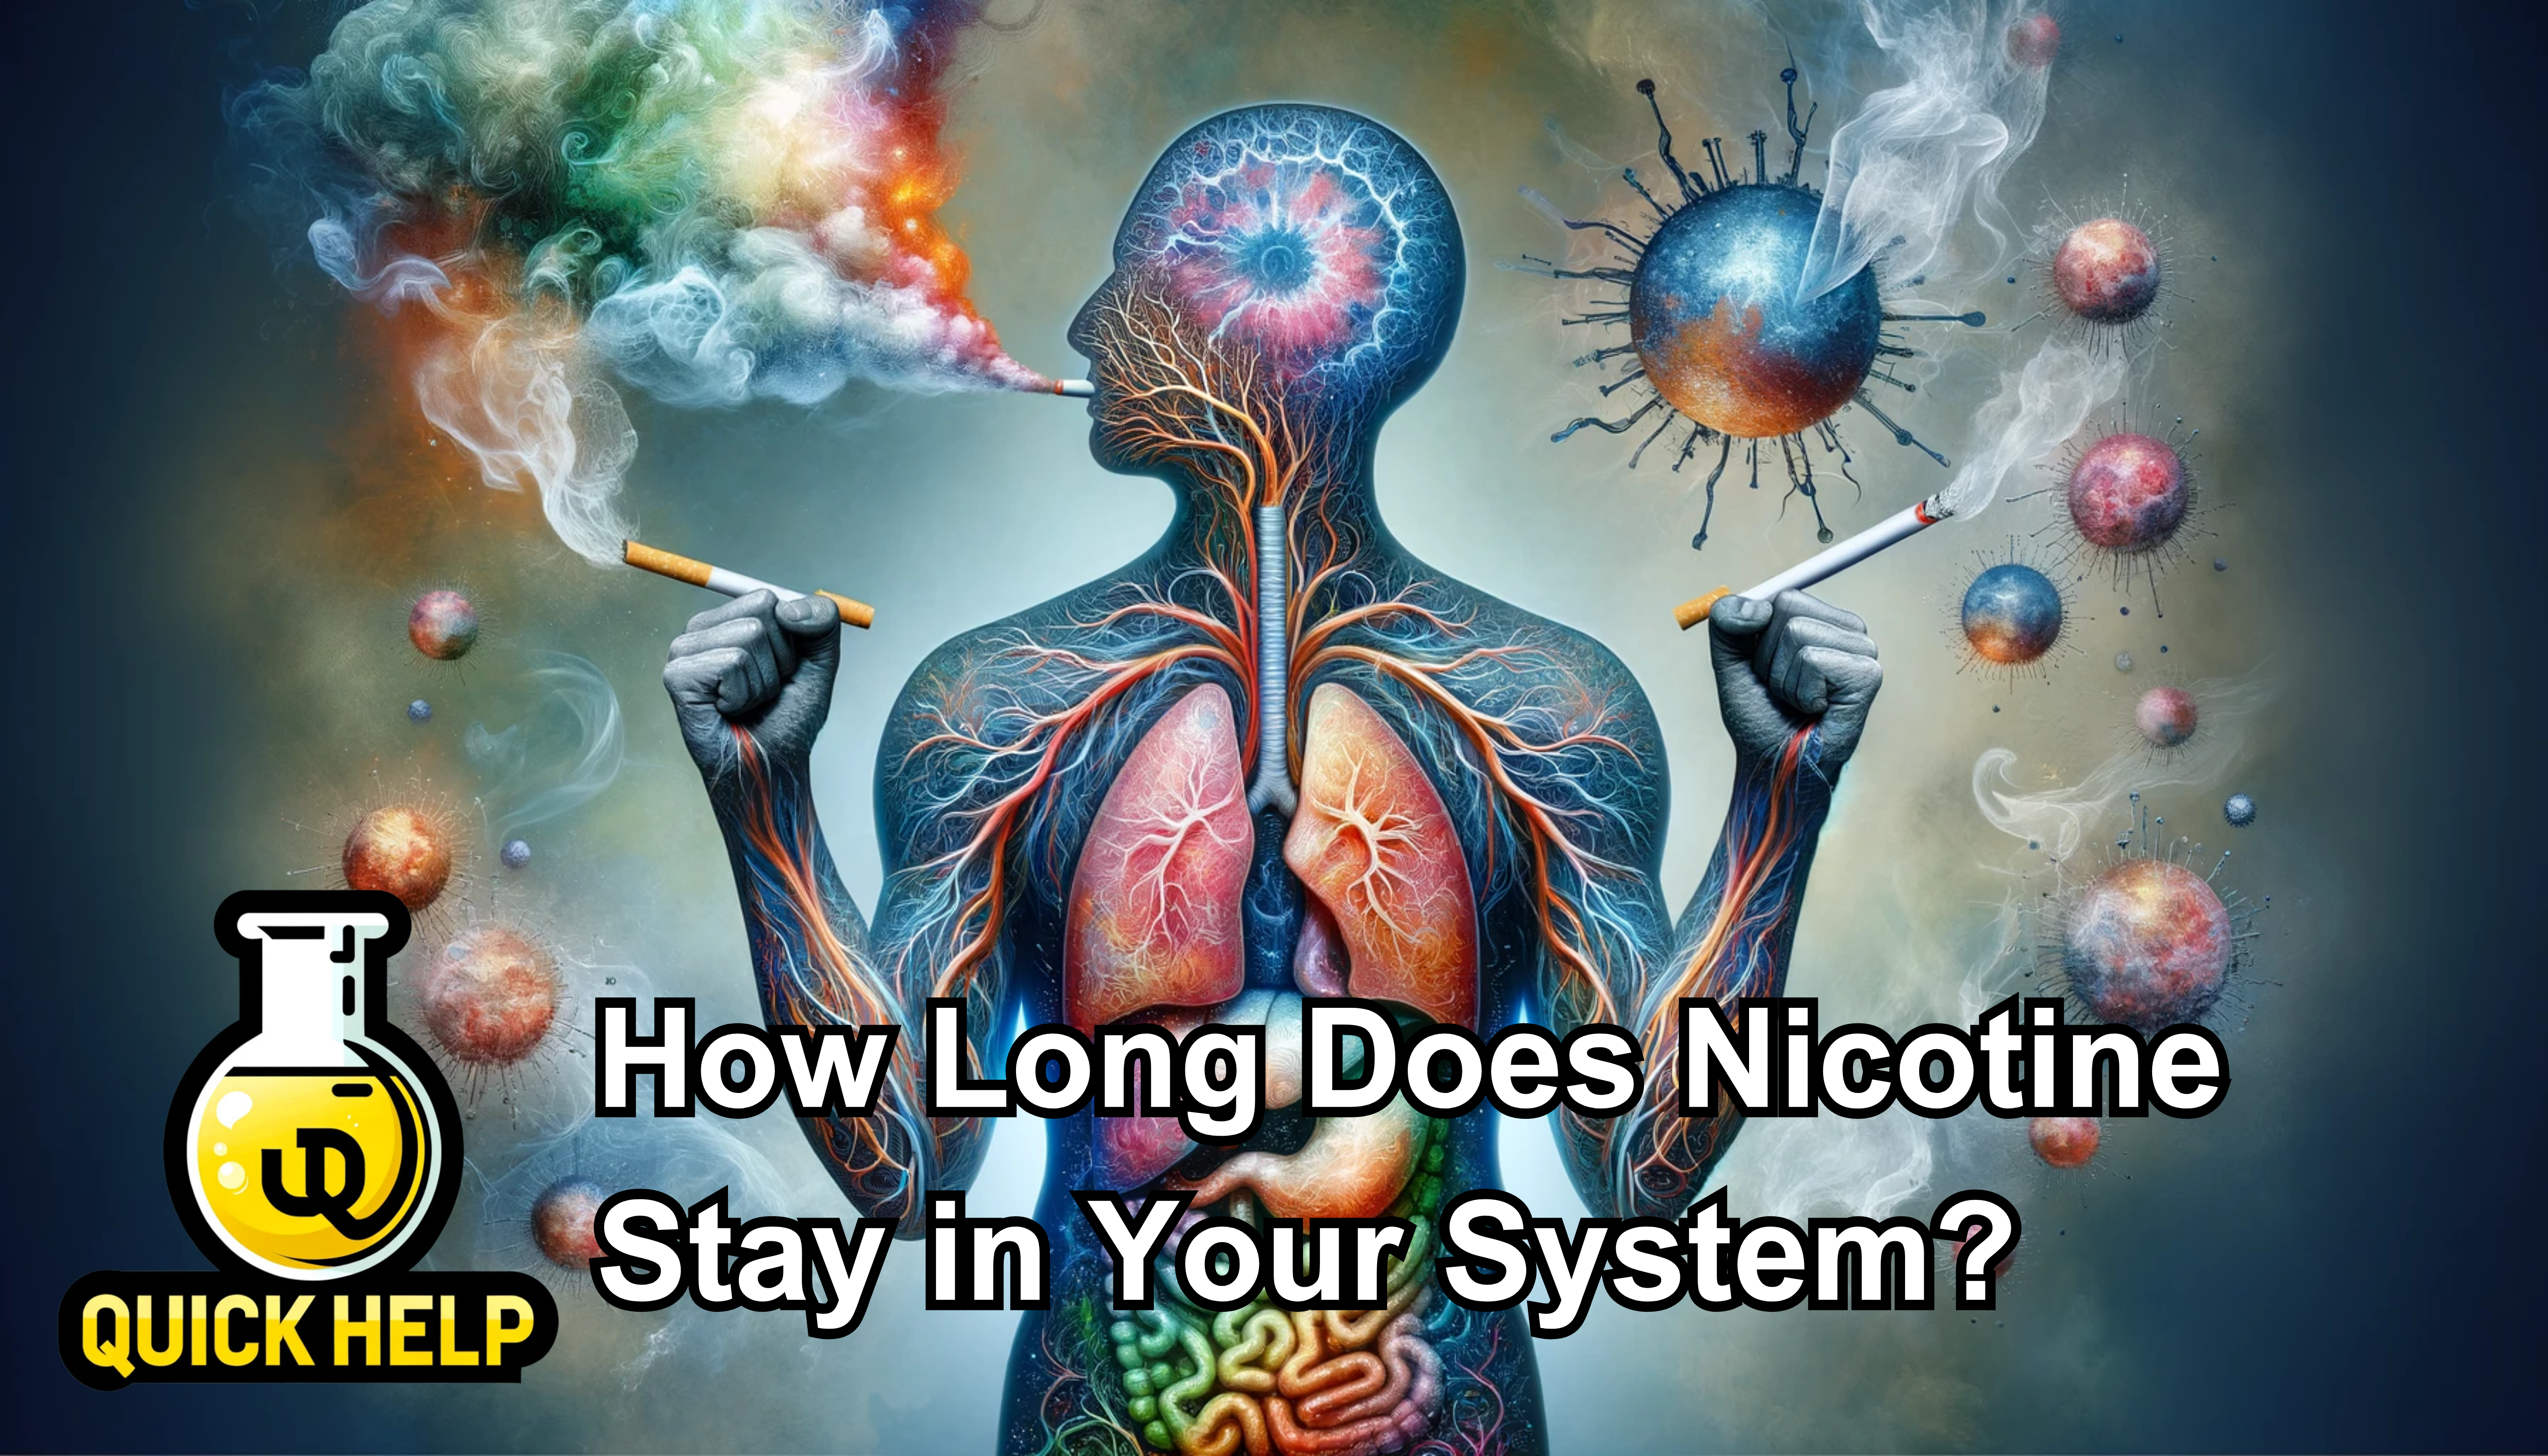 How Long Does Nicotine Stay in Your System? (Urine)